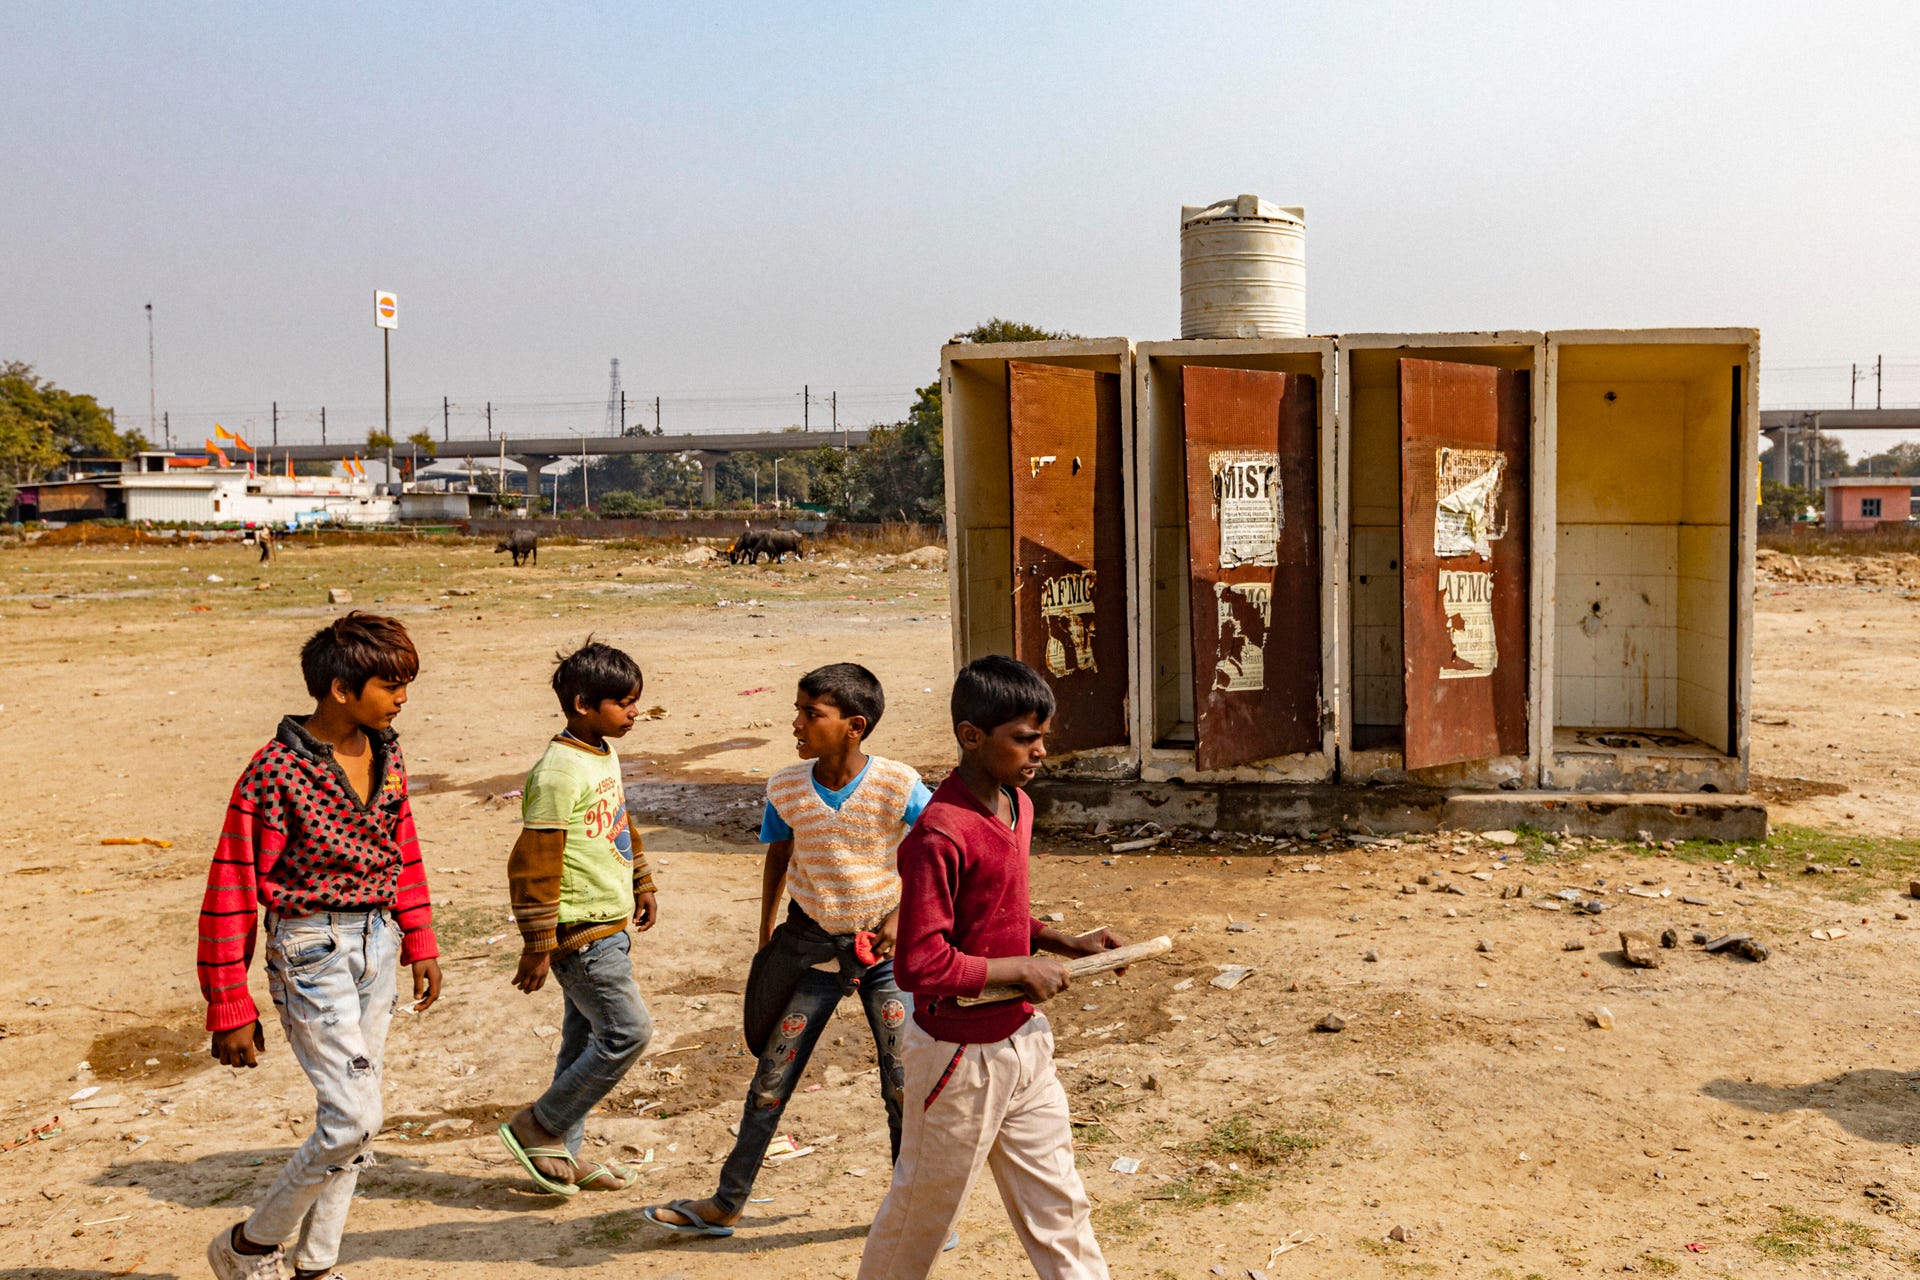 Four boys walk past one of the decrepit community toilets in the slums of Faridabad, India.